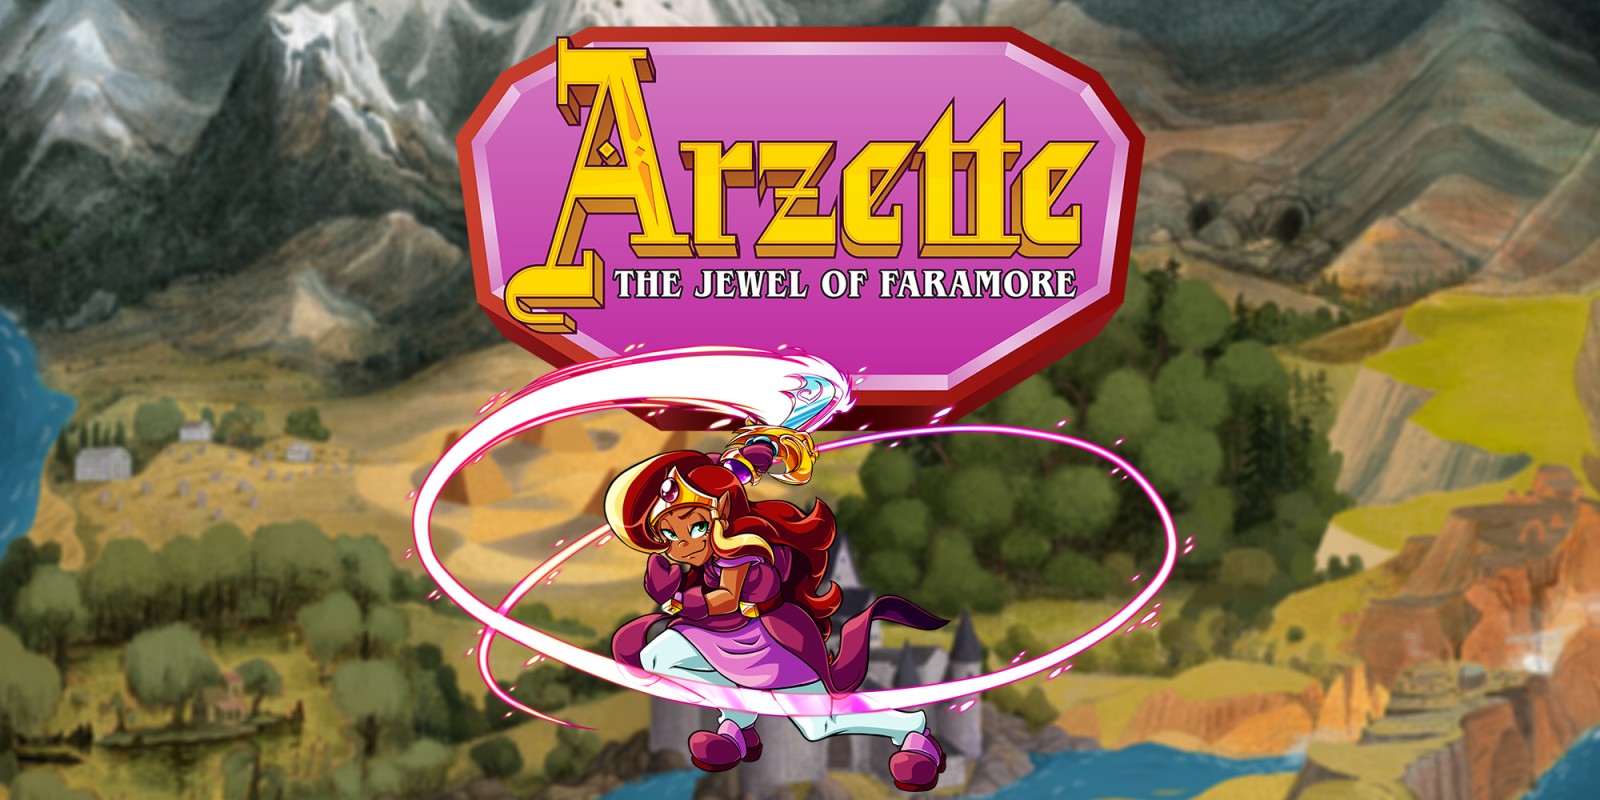 Arzette The Jewel of Faramore Collection Nintendo Version Full Game Setup Free Download